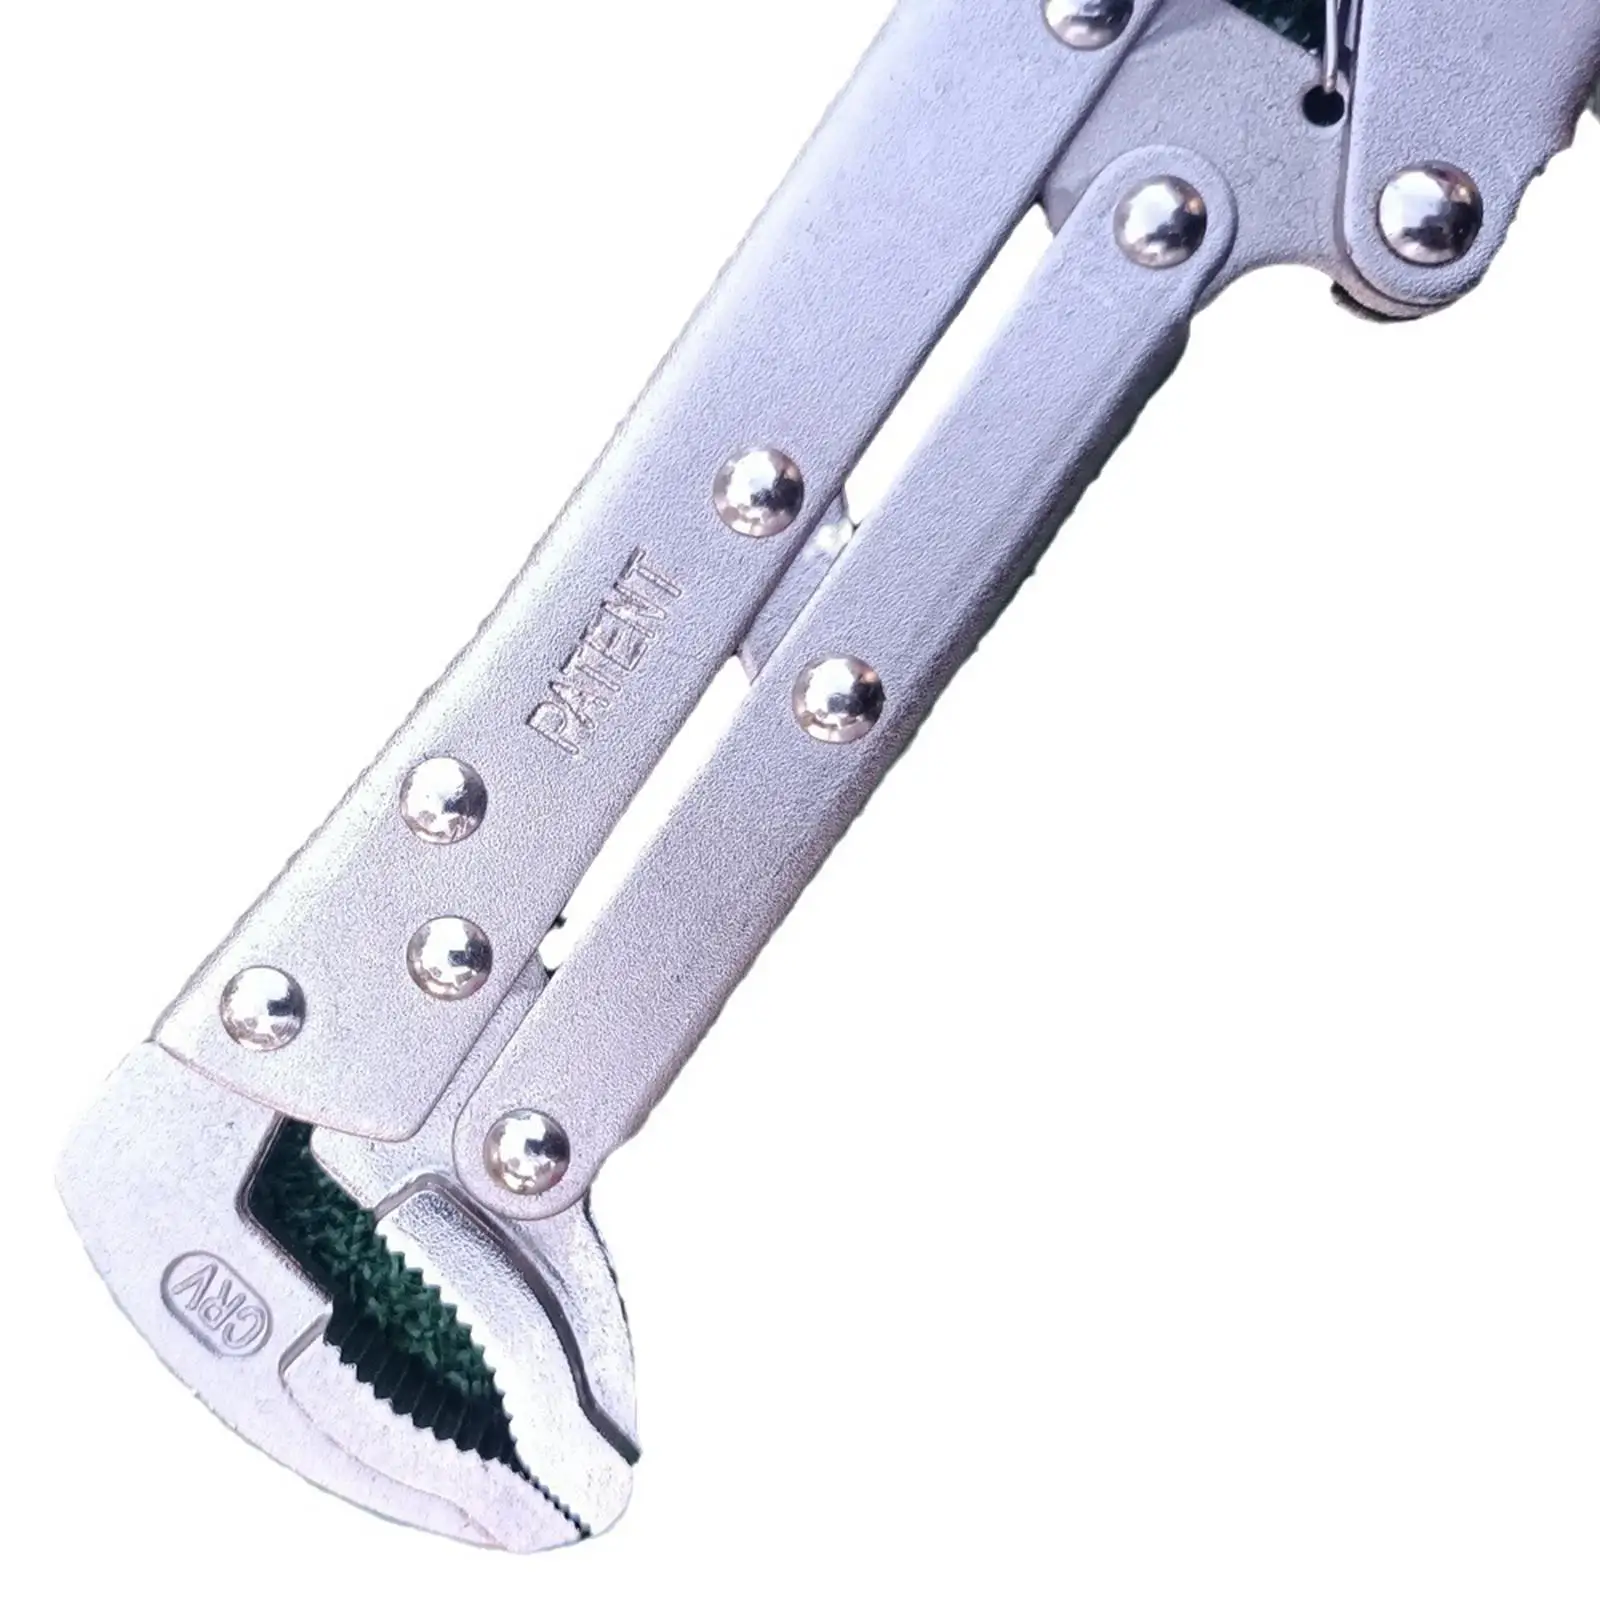 Curved Jaw Locking Pliers 12Inches for Wood Work Auto Repair Welding